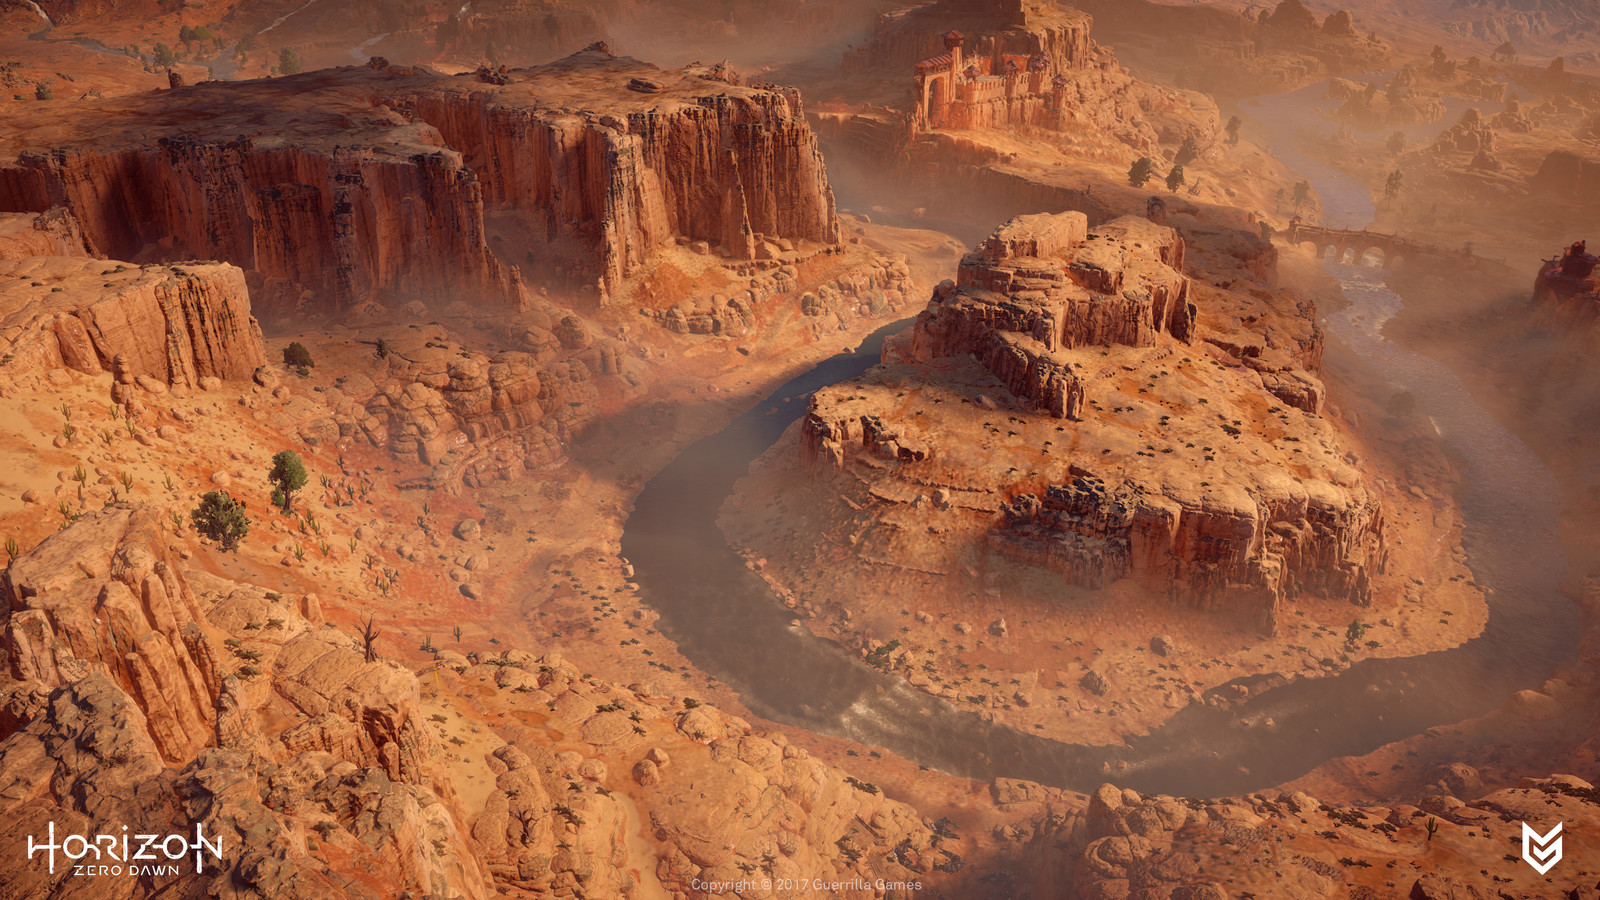 Gatelands Canyon inspired by the Colorado River